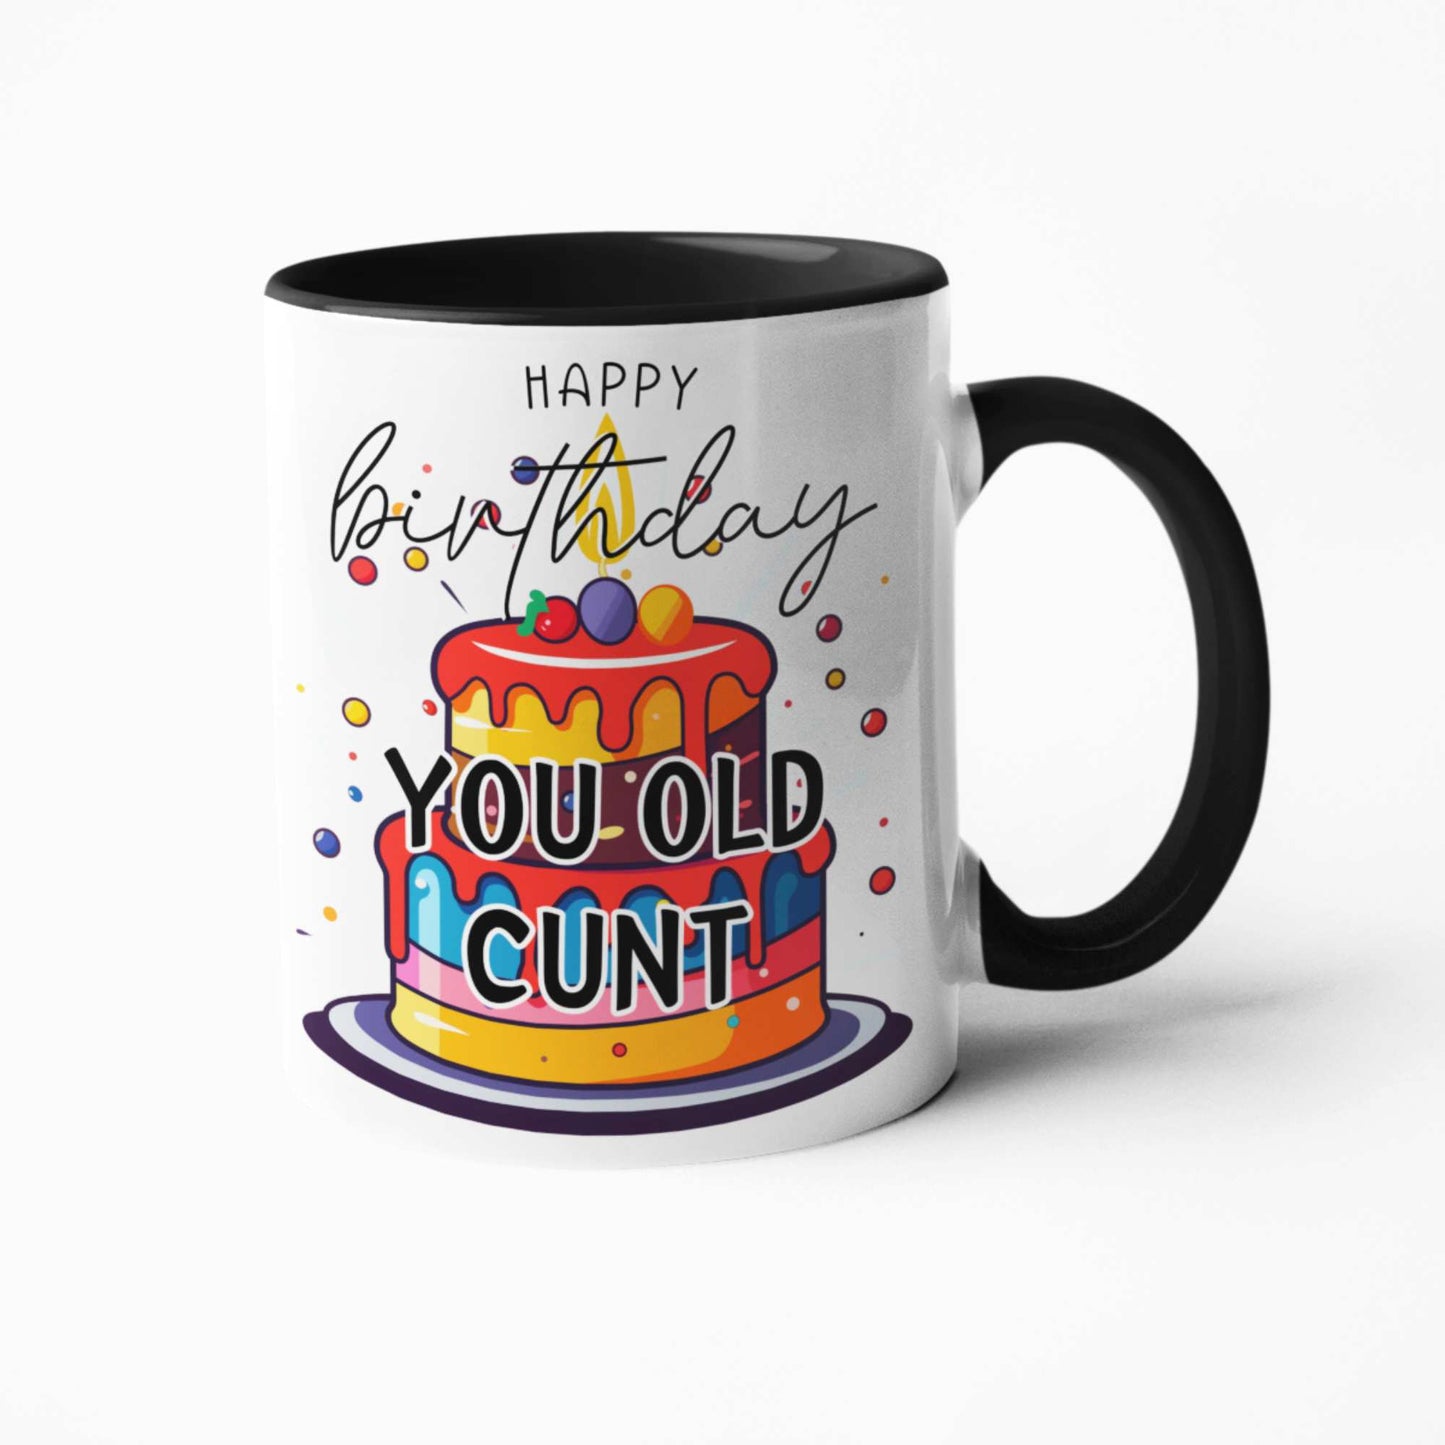 Happy Birthday You Old Cunt - Hilarious Birthday Mug, Tumbler, Coaster Gift for Friends and Work Besties